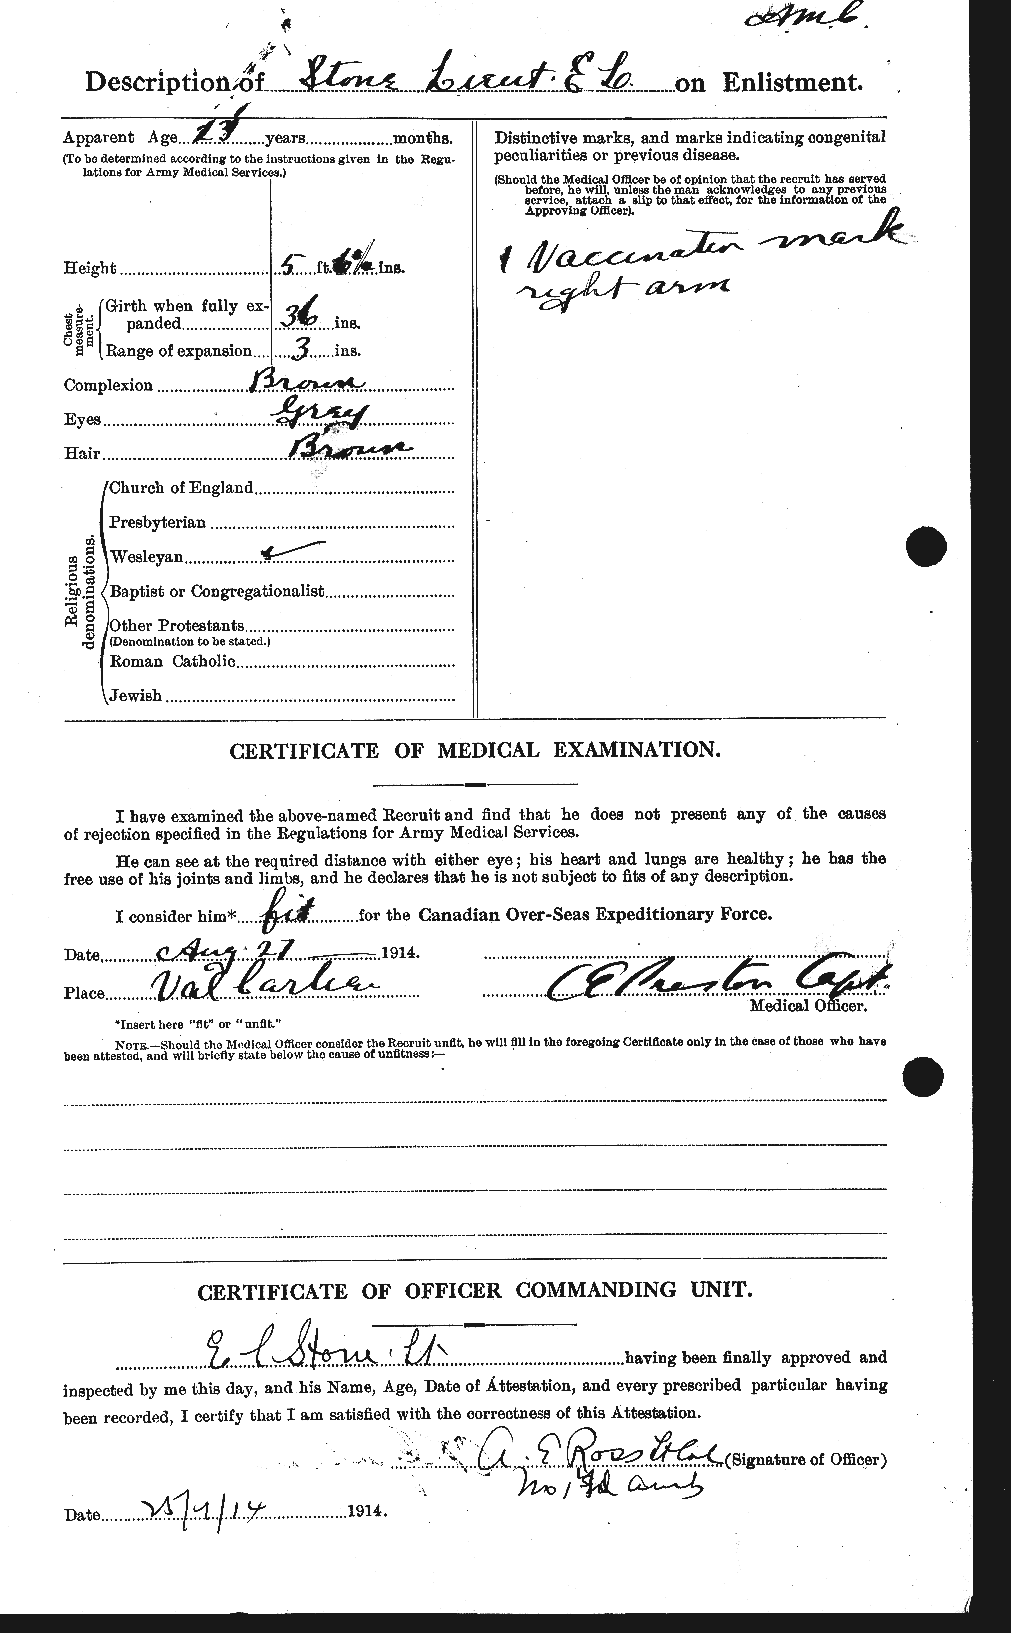 Personnel Records of the First World War - CEF 120456b